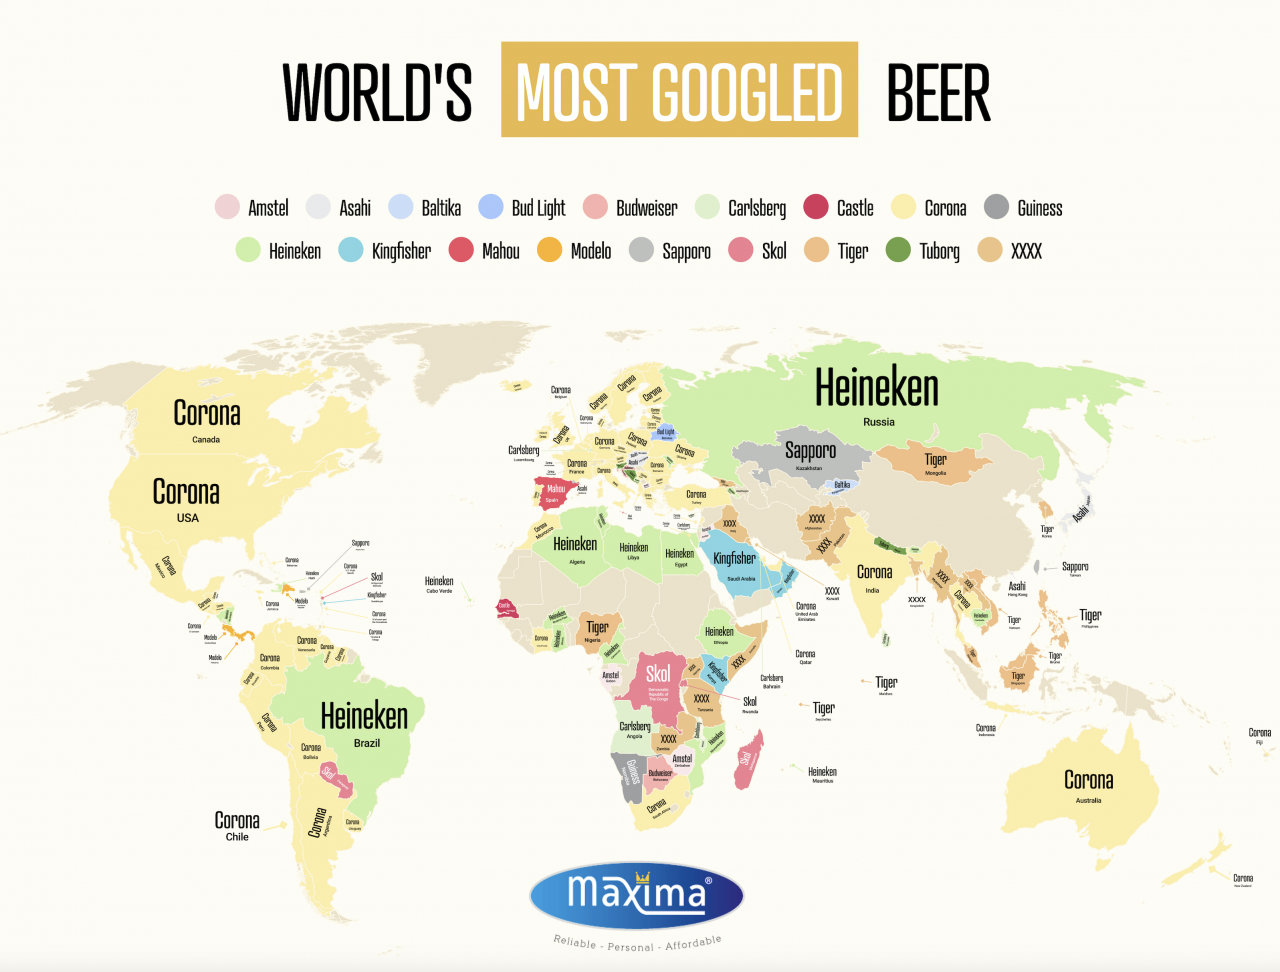 The world's most popular beer has been revealed by new data